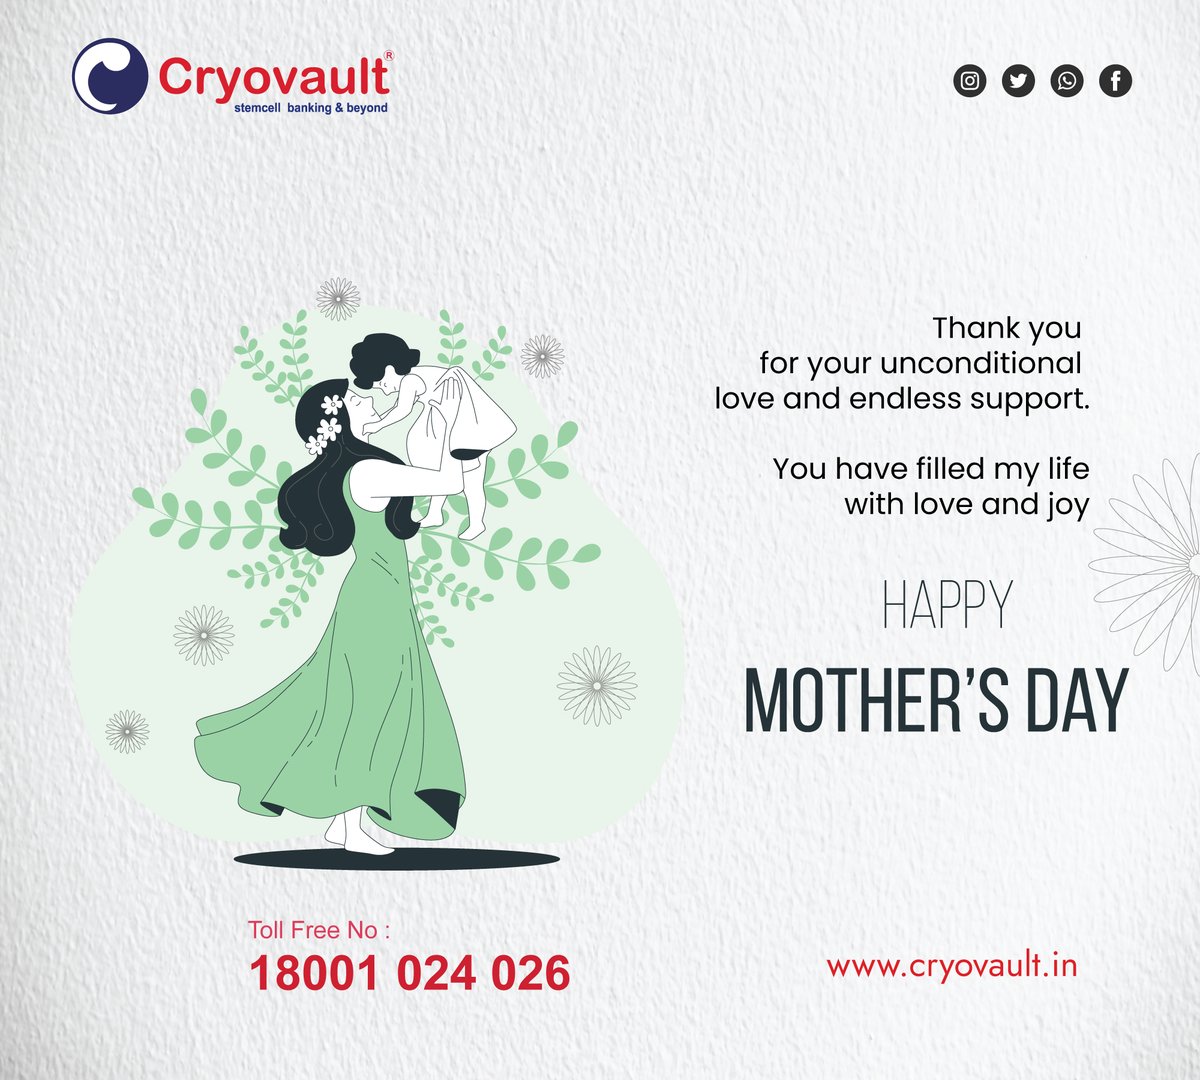 You have filled my life with love and joy....!

*Happy Mother's Day ....!*

Call Now:- 18001024026
Visit:- cryovault.in
#cryovault #cordblood #stemcellbanking #stemcelltreatment #stemcellbanking #india #savestemcellsafterbirth #largeststemcell #cordbloodstemcells